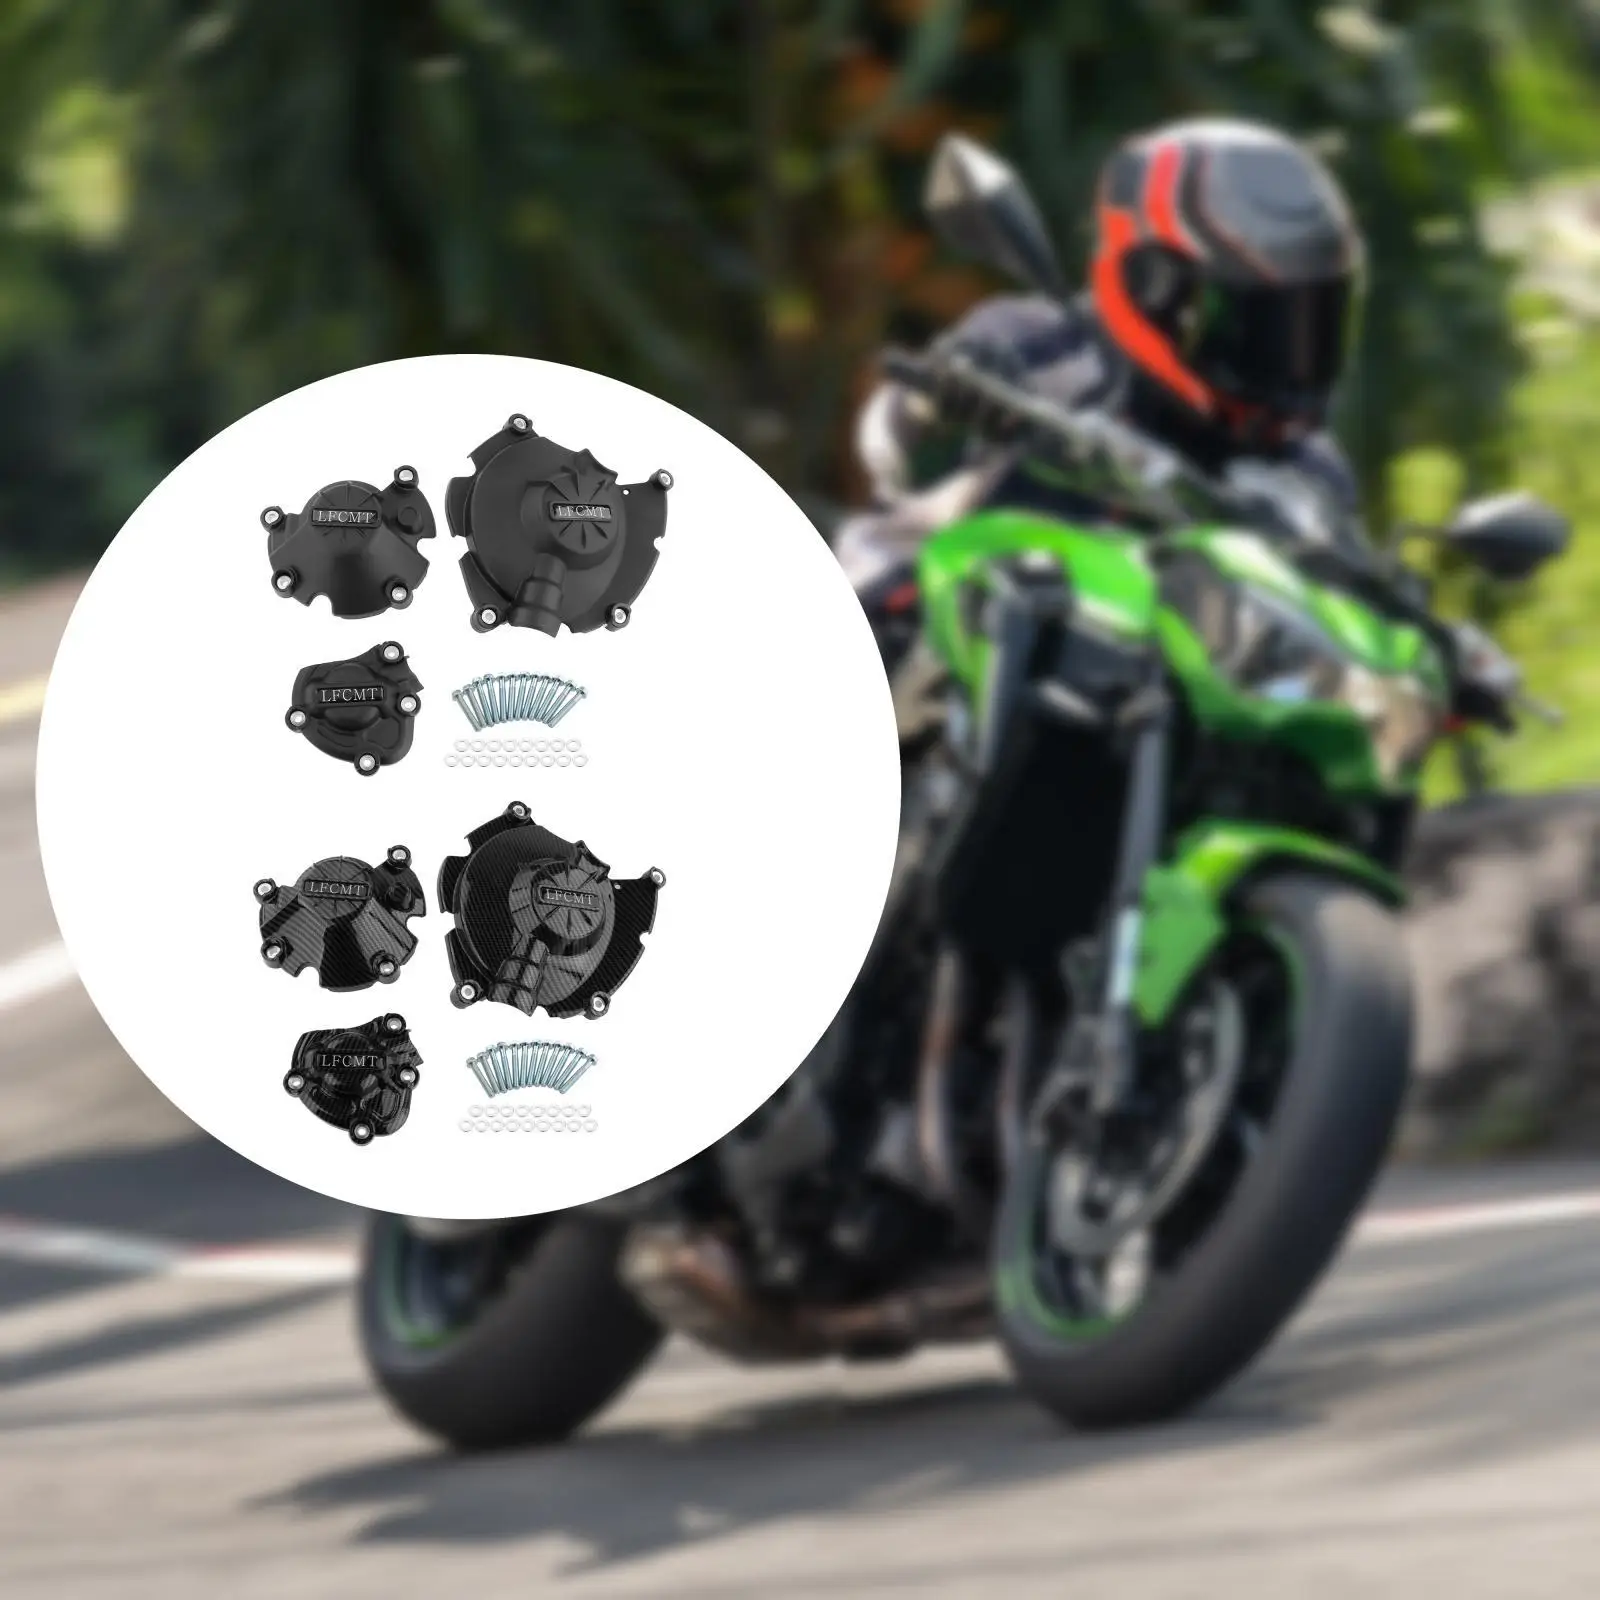 Motorbike Engine Cover Fit for Yamaha Mt-10 2015-2021 Easy to Install Replacement Accessories